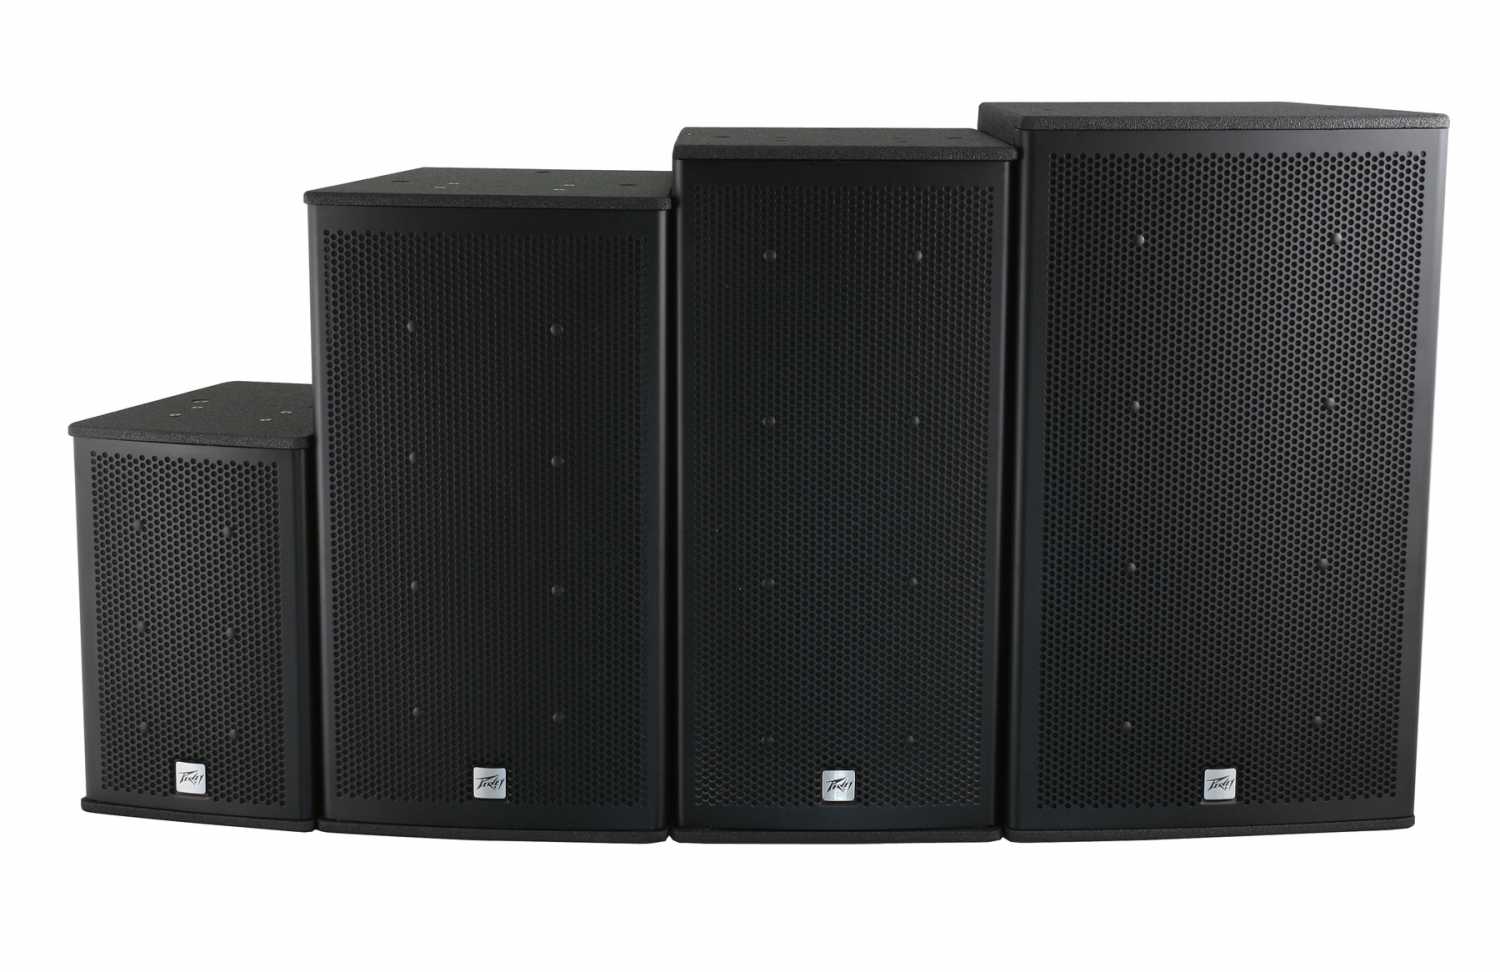 The Elements CS Series is available in three two-way, full range configurations and as a flyable subwoofer